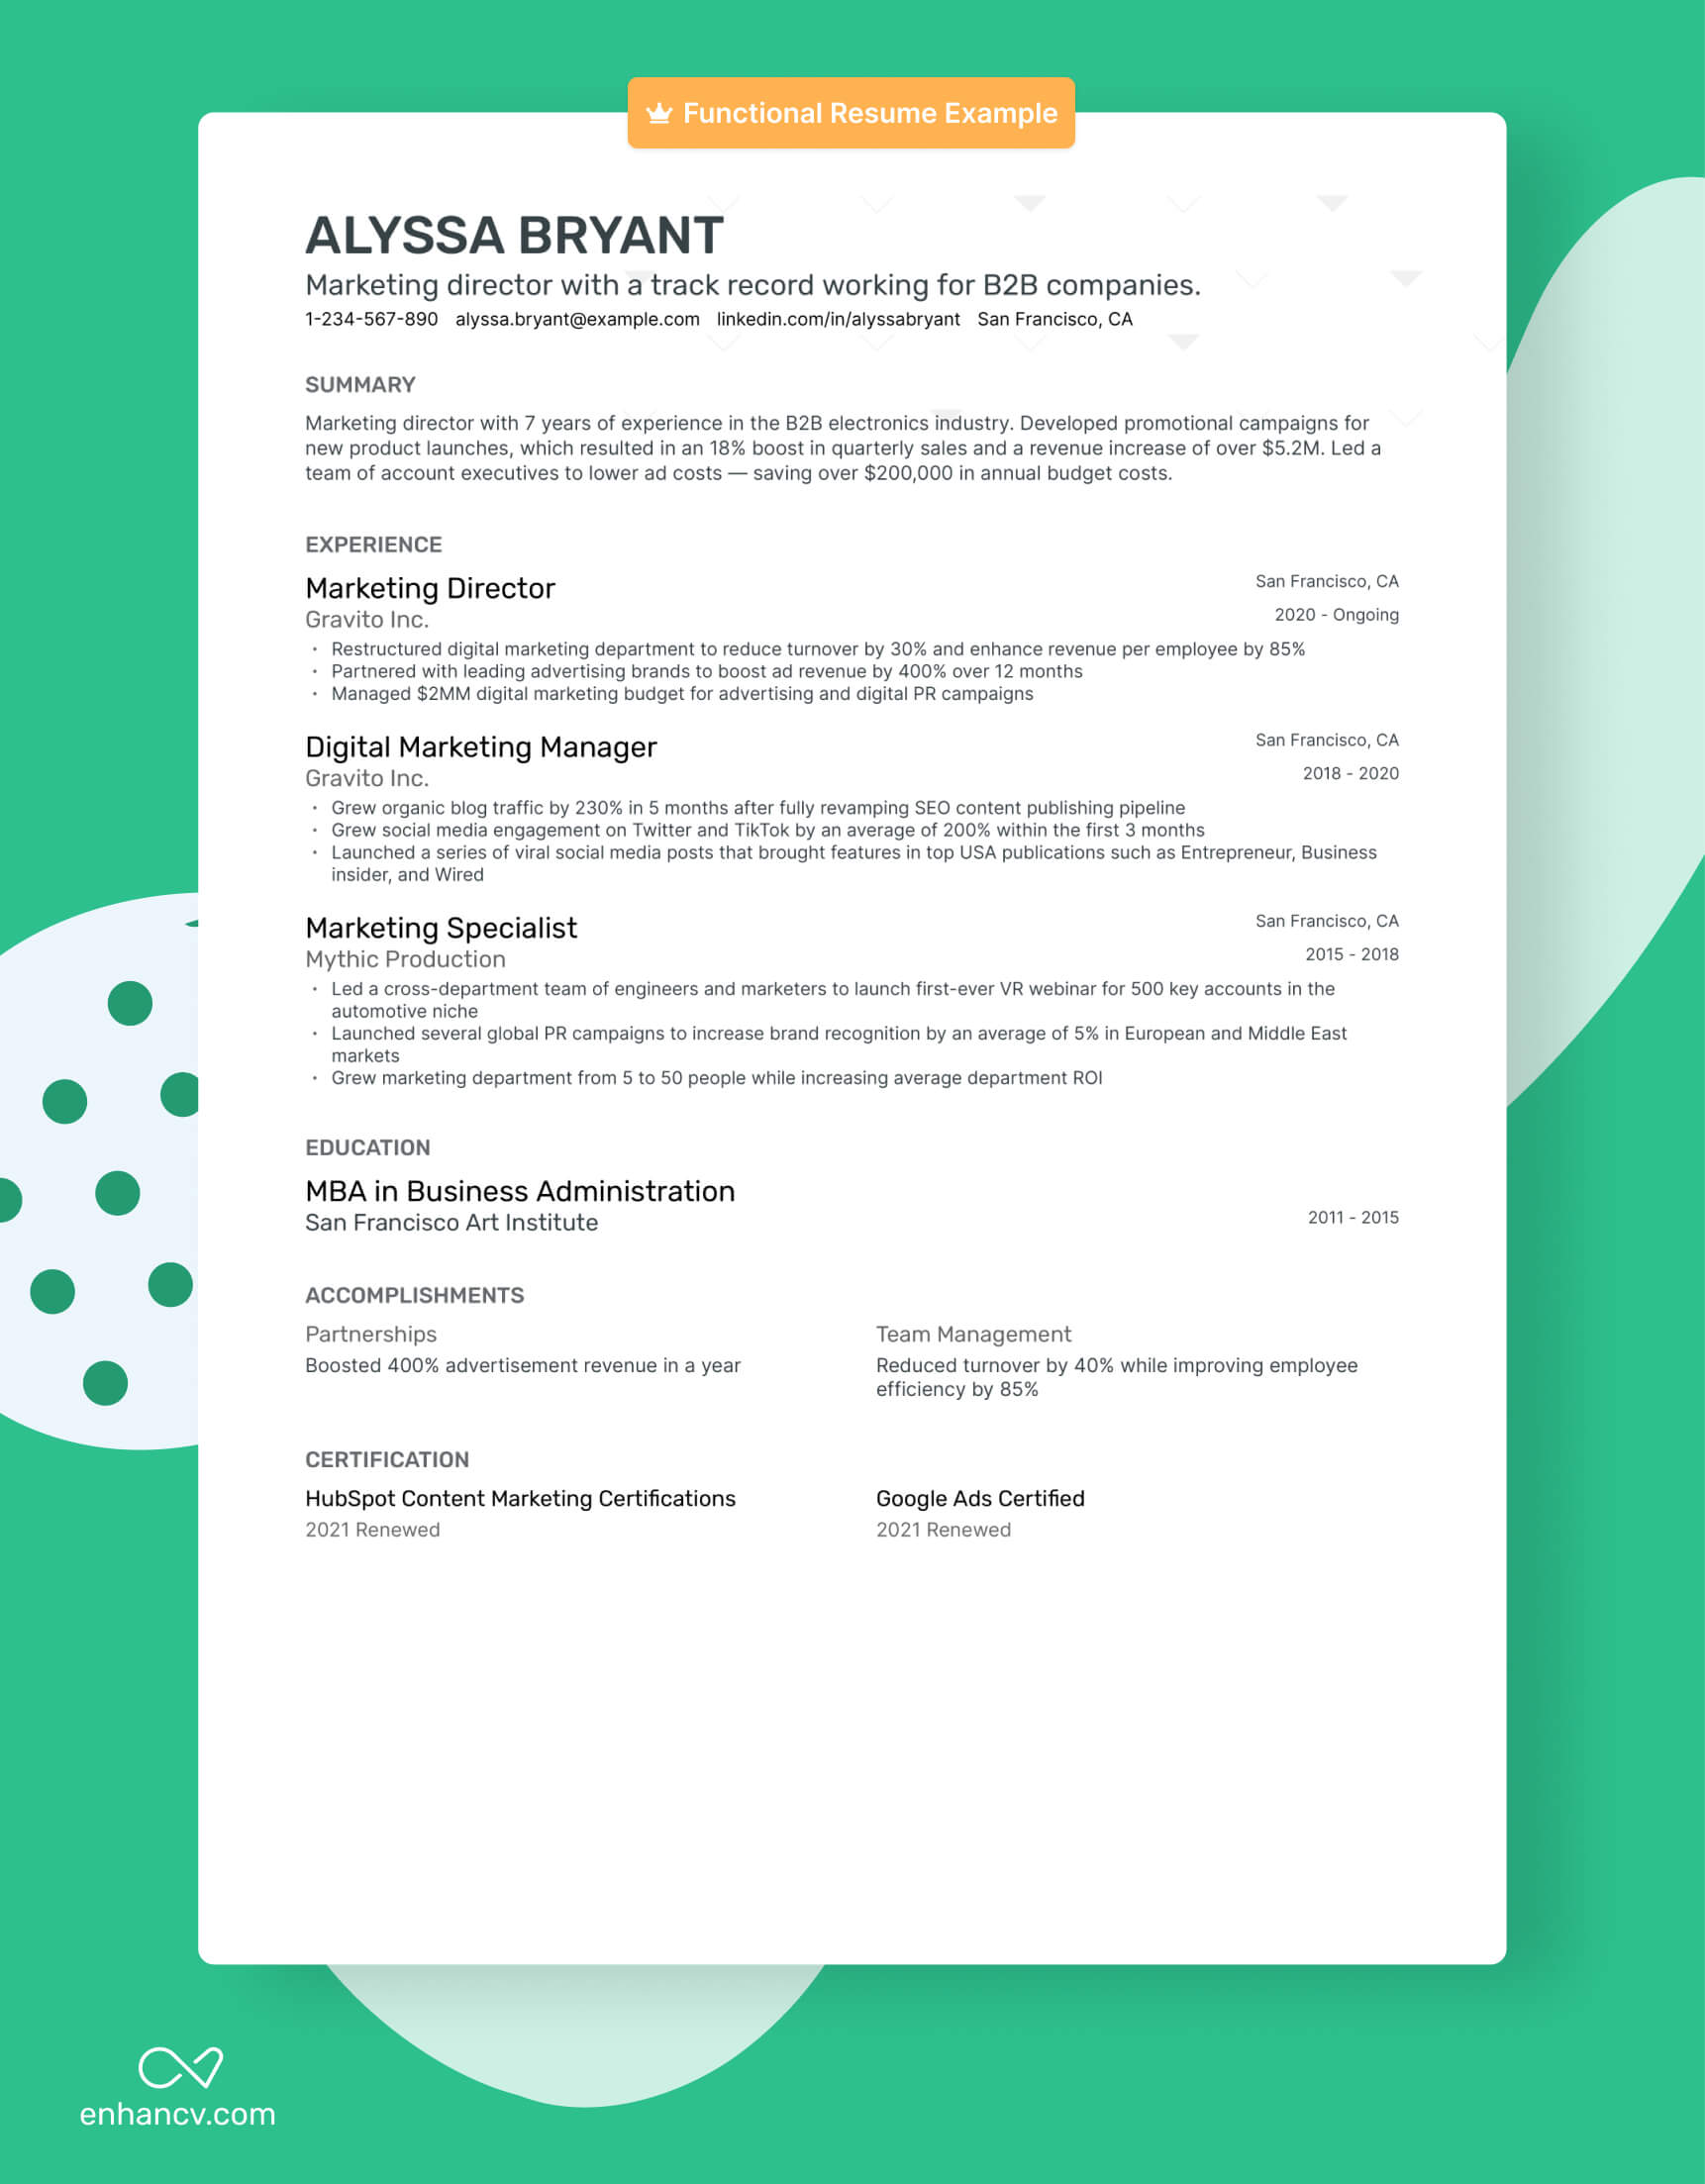 functional resume example how to start a resume.jpg